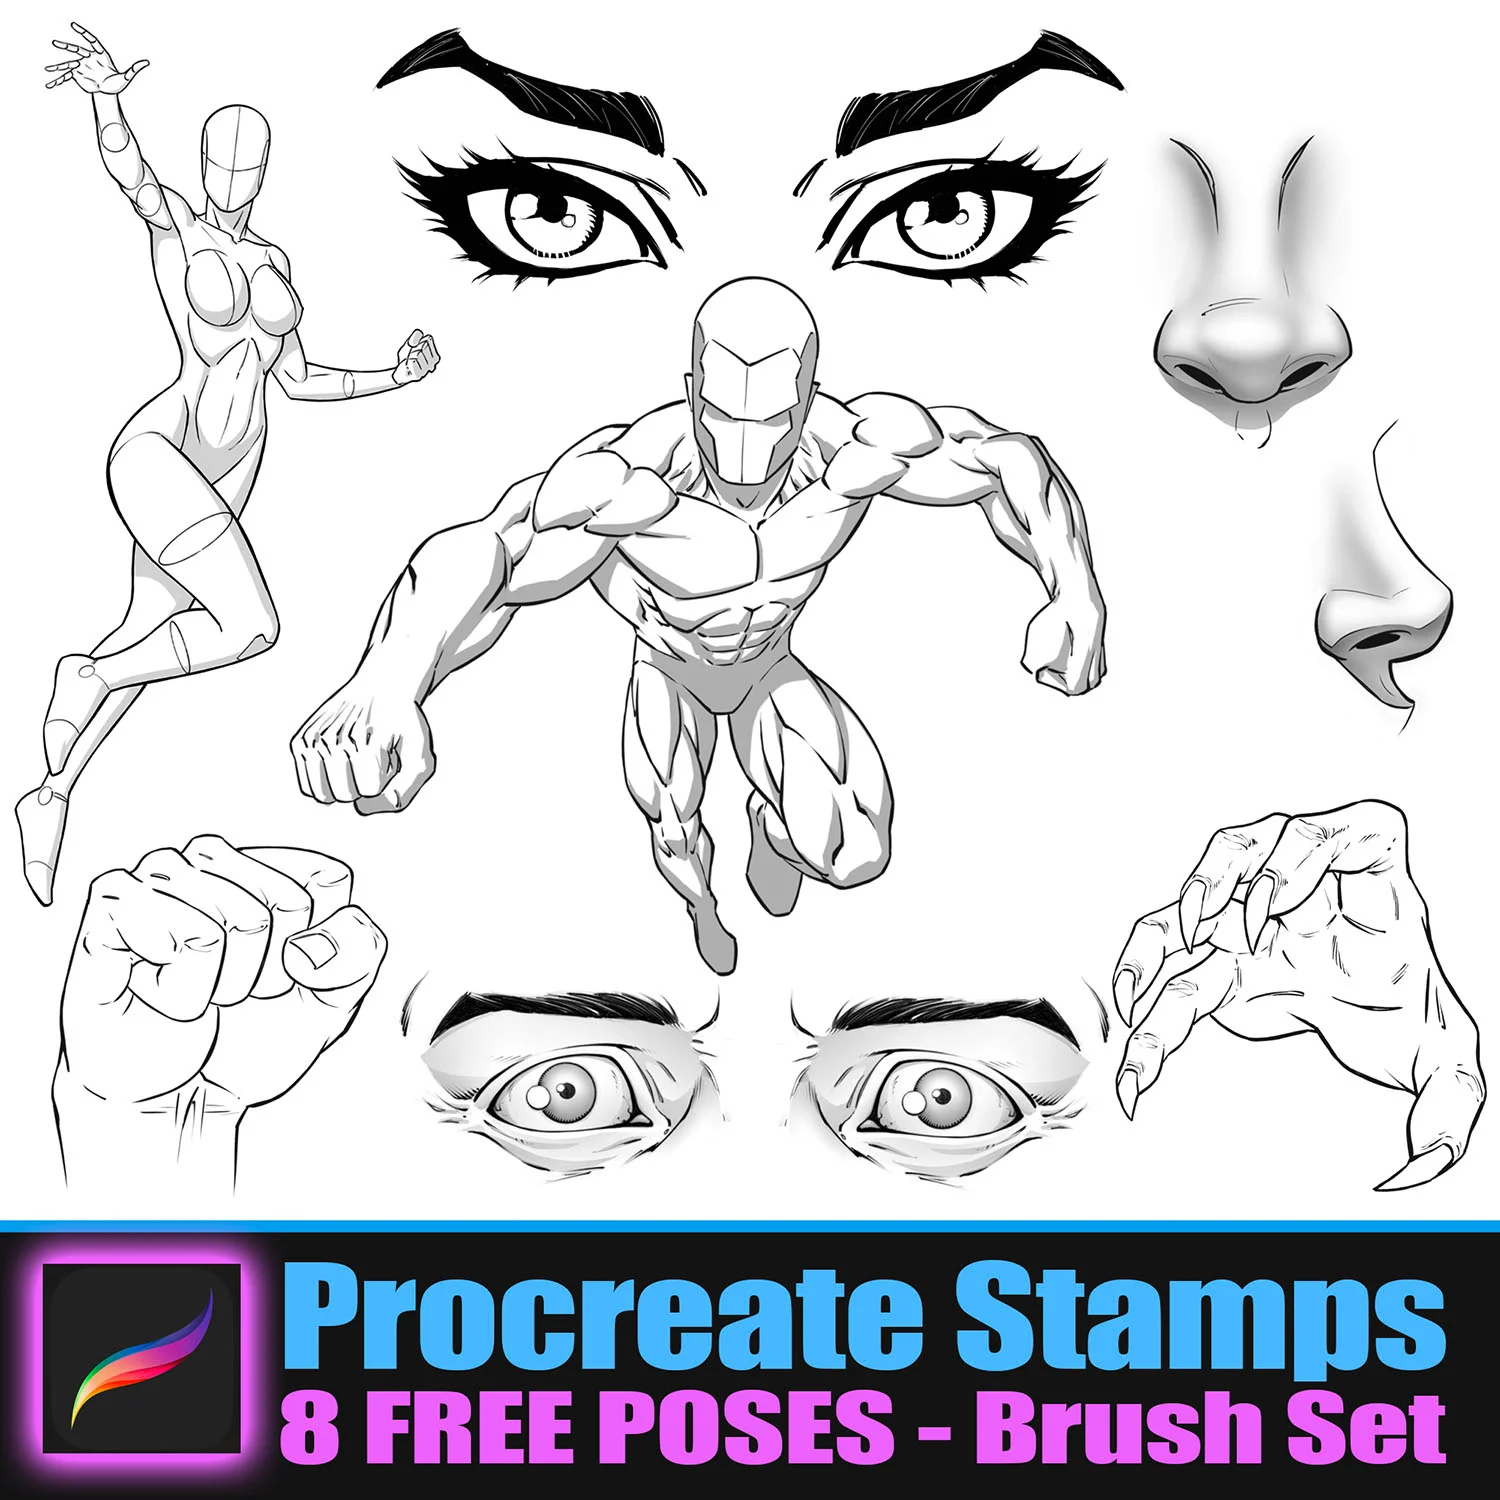 How to Draw the CLASSIC SUPERHERO POSE - Draw it, Too!